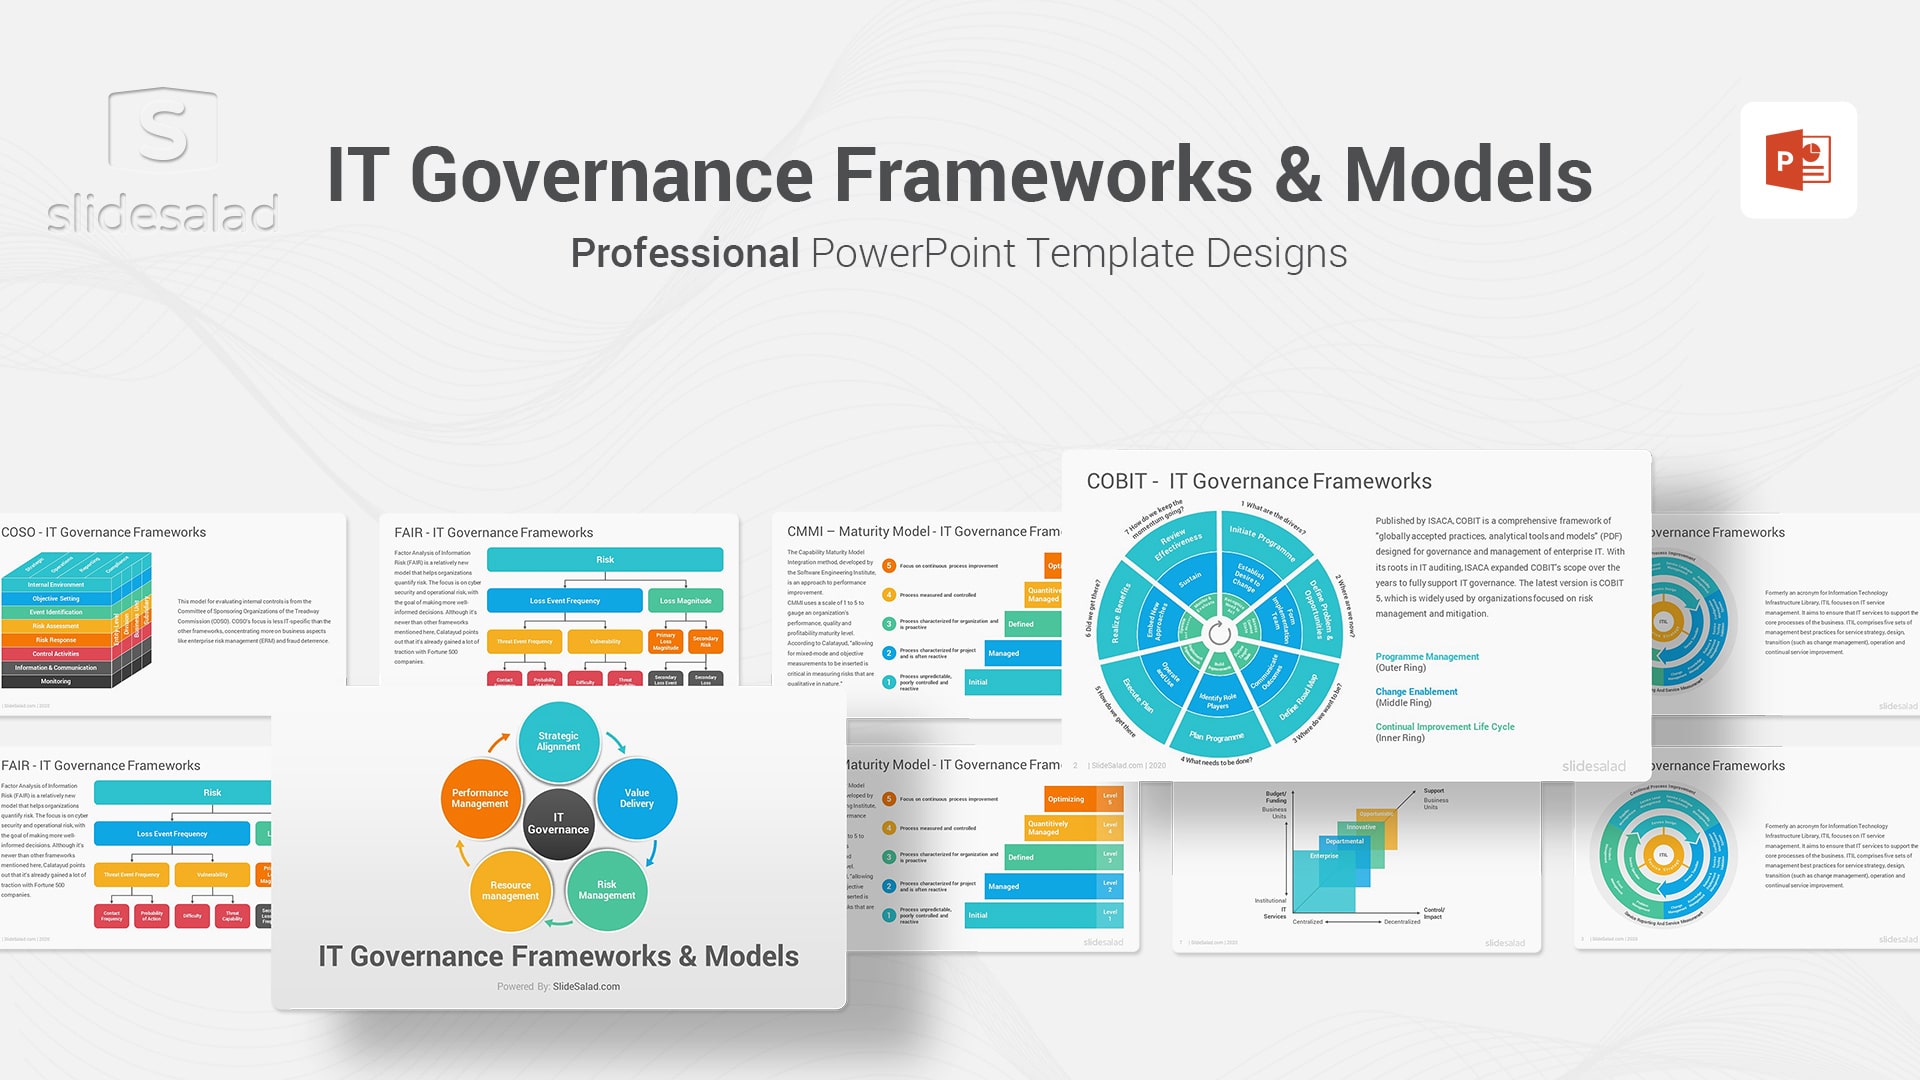 IT Governance Frameworks PowerPoint Template Diagrams - All-in-One Information Technology PPT Template to Get Ahead of IT Risks with Effective Governance Frameworks